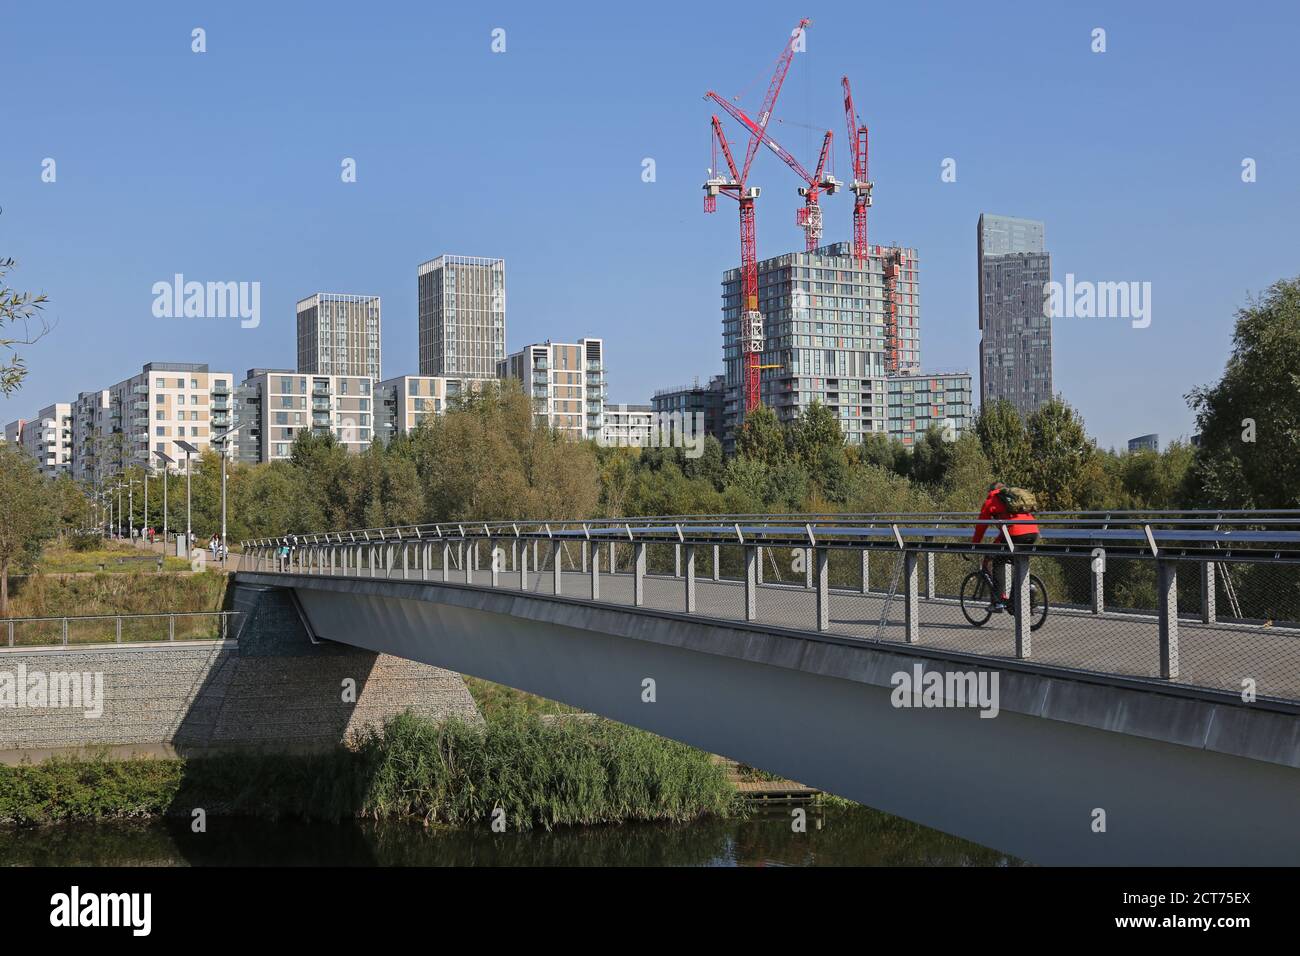 Queen Elizabeth Olympic Park, London. Cyclists on East Cross bridge. Cranes beyond as more apartment blocks are added to the Olympic Village site. Stock Photo